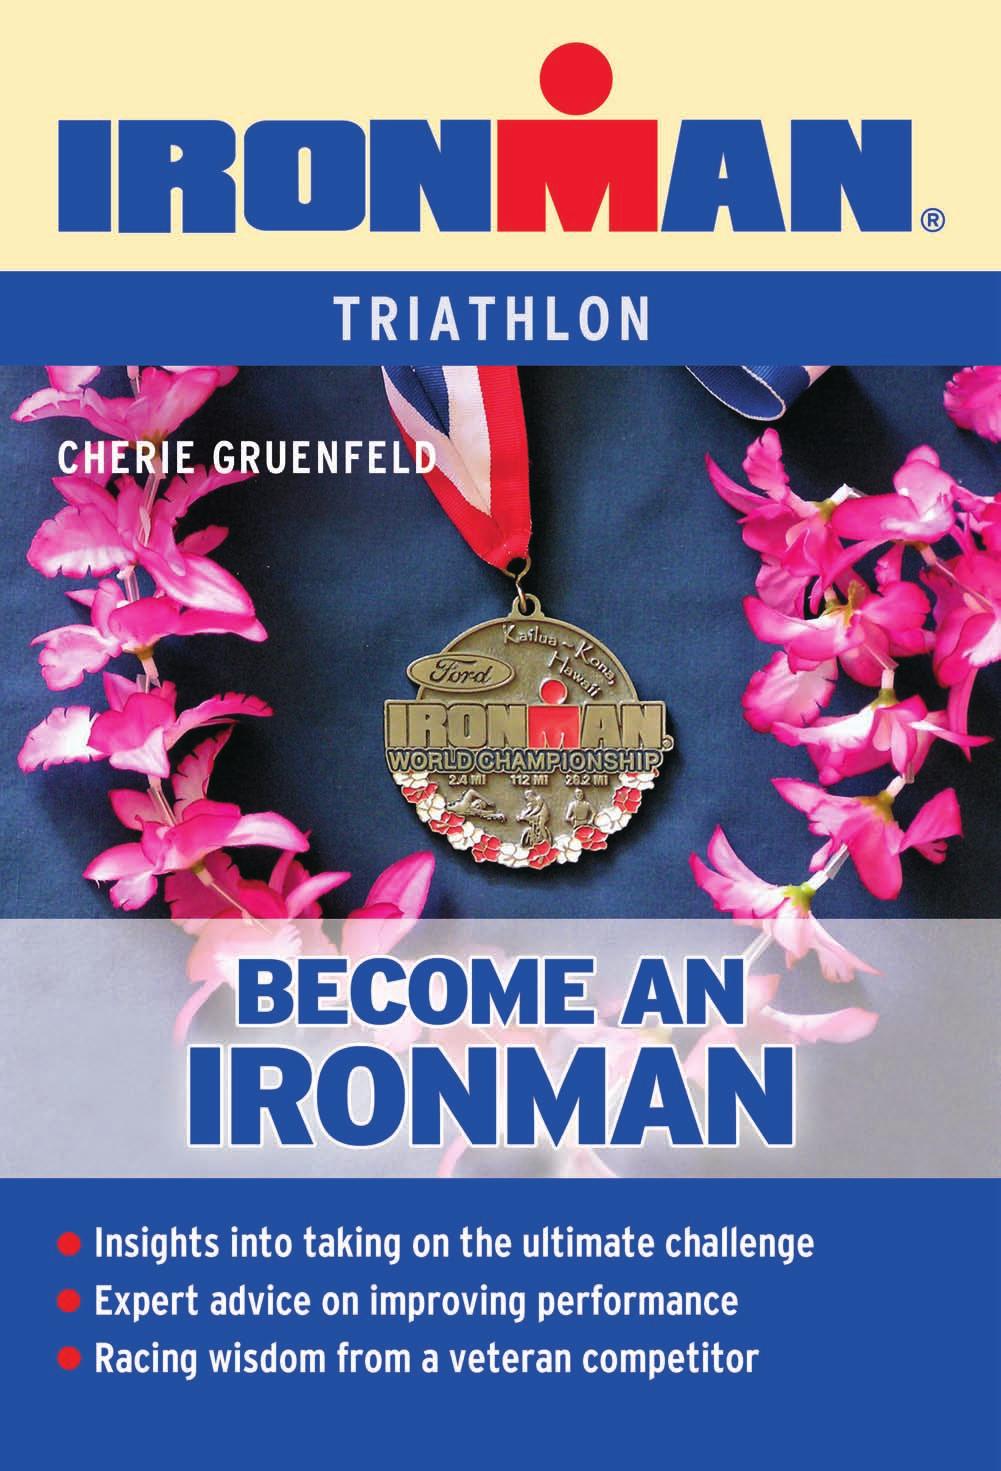 Written in a straightforward, easily readable style, Become an Ironman is designed to deliver the most information in the fewest words possible and is not intended to duplicate all of the expert